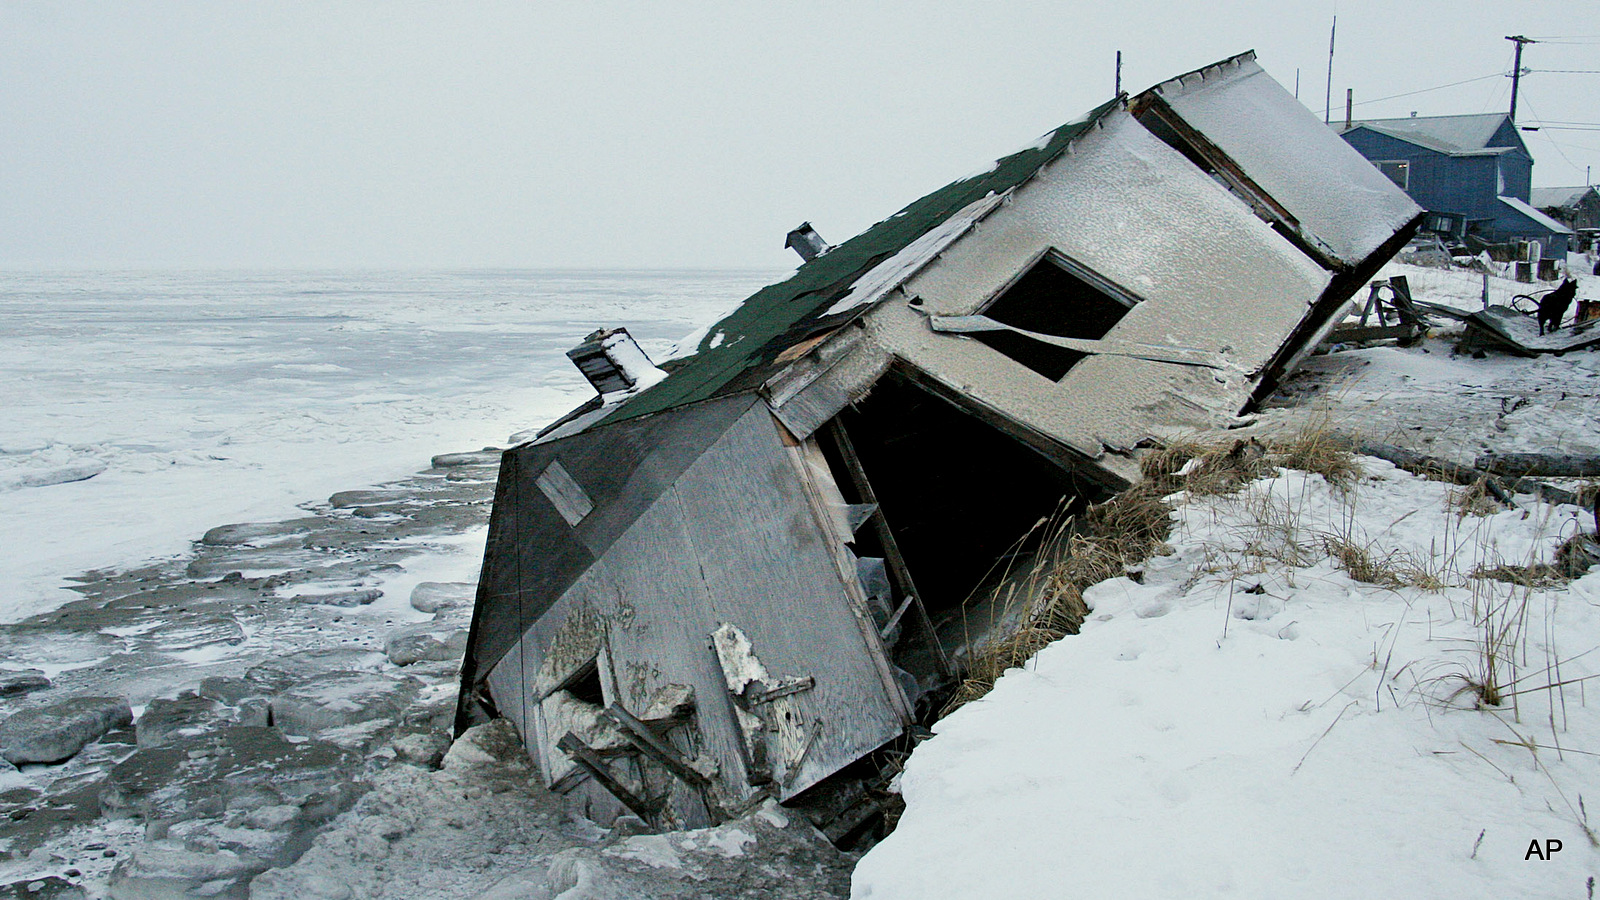 Nathan Weyiouanna's abandoned house at the west end of Shishmaref, Alaska, Dec. 8, 2006, sits on the beach after sliding off during a fall storm in 2005.